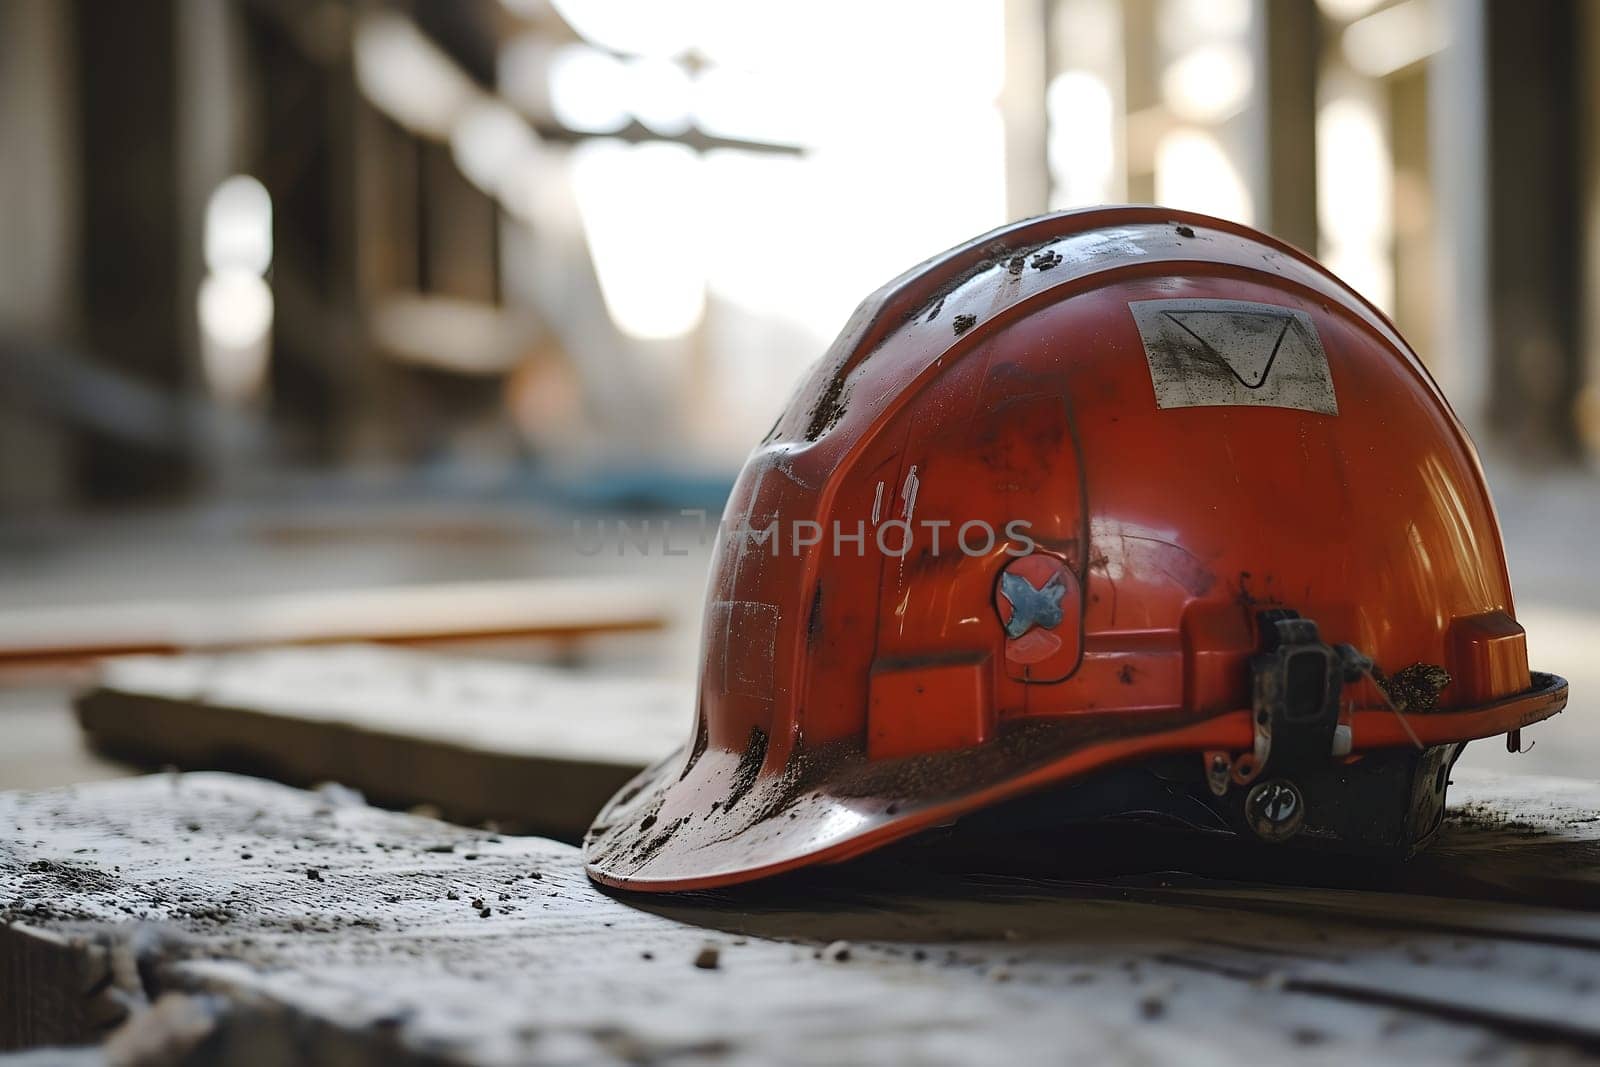 Old orange hard hat at construction site. Neural network generated image. Not based on any actual scene or pattern.